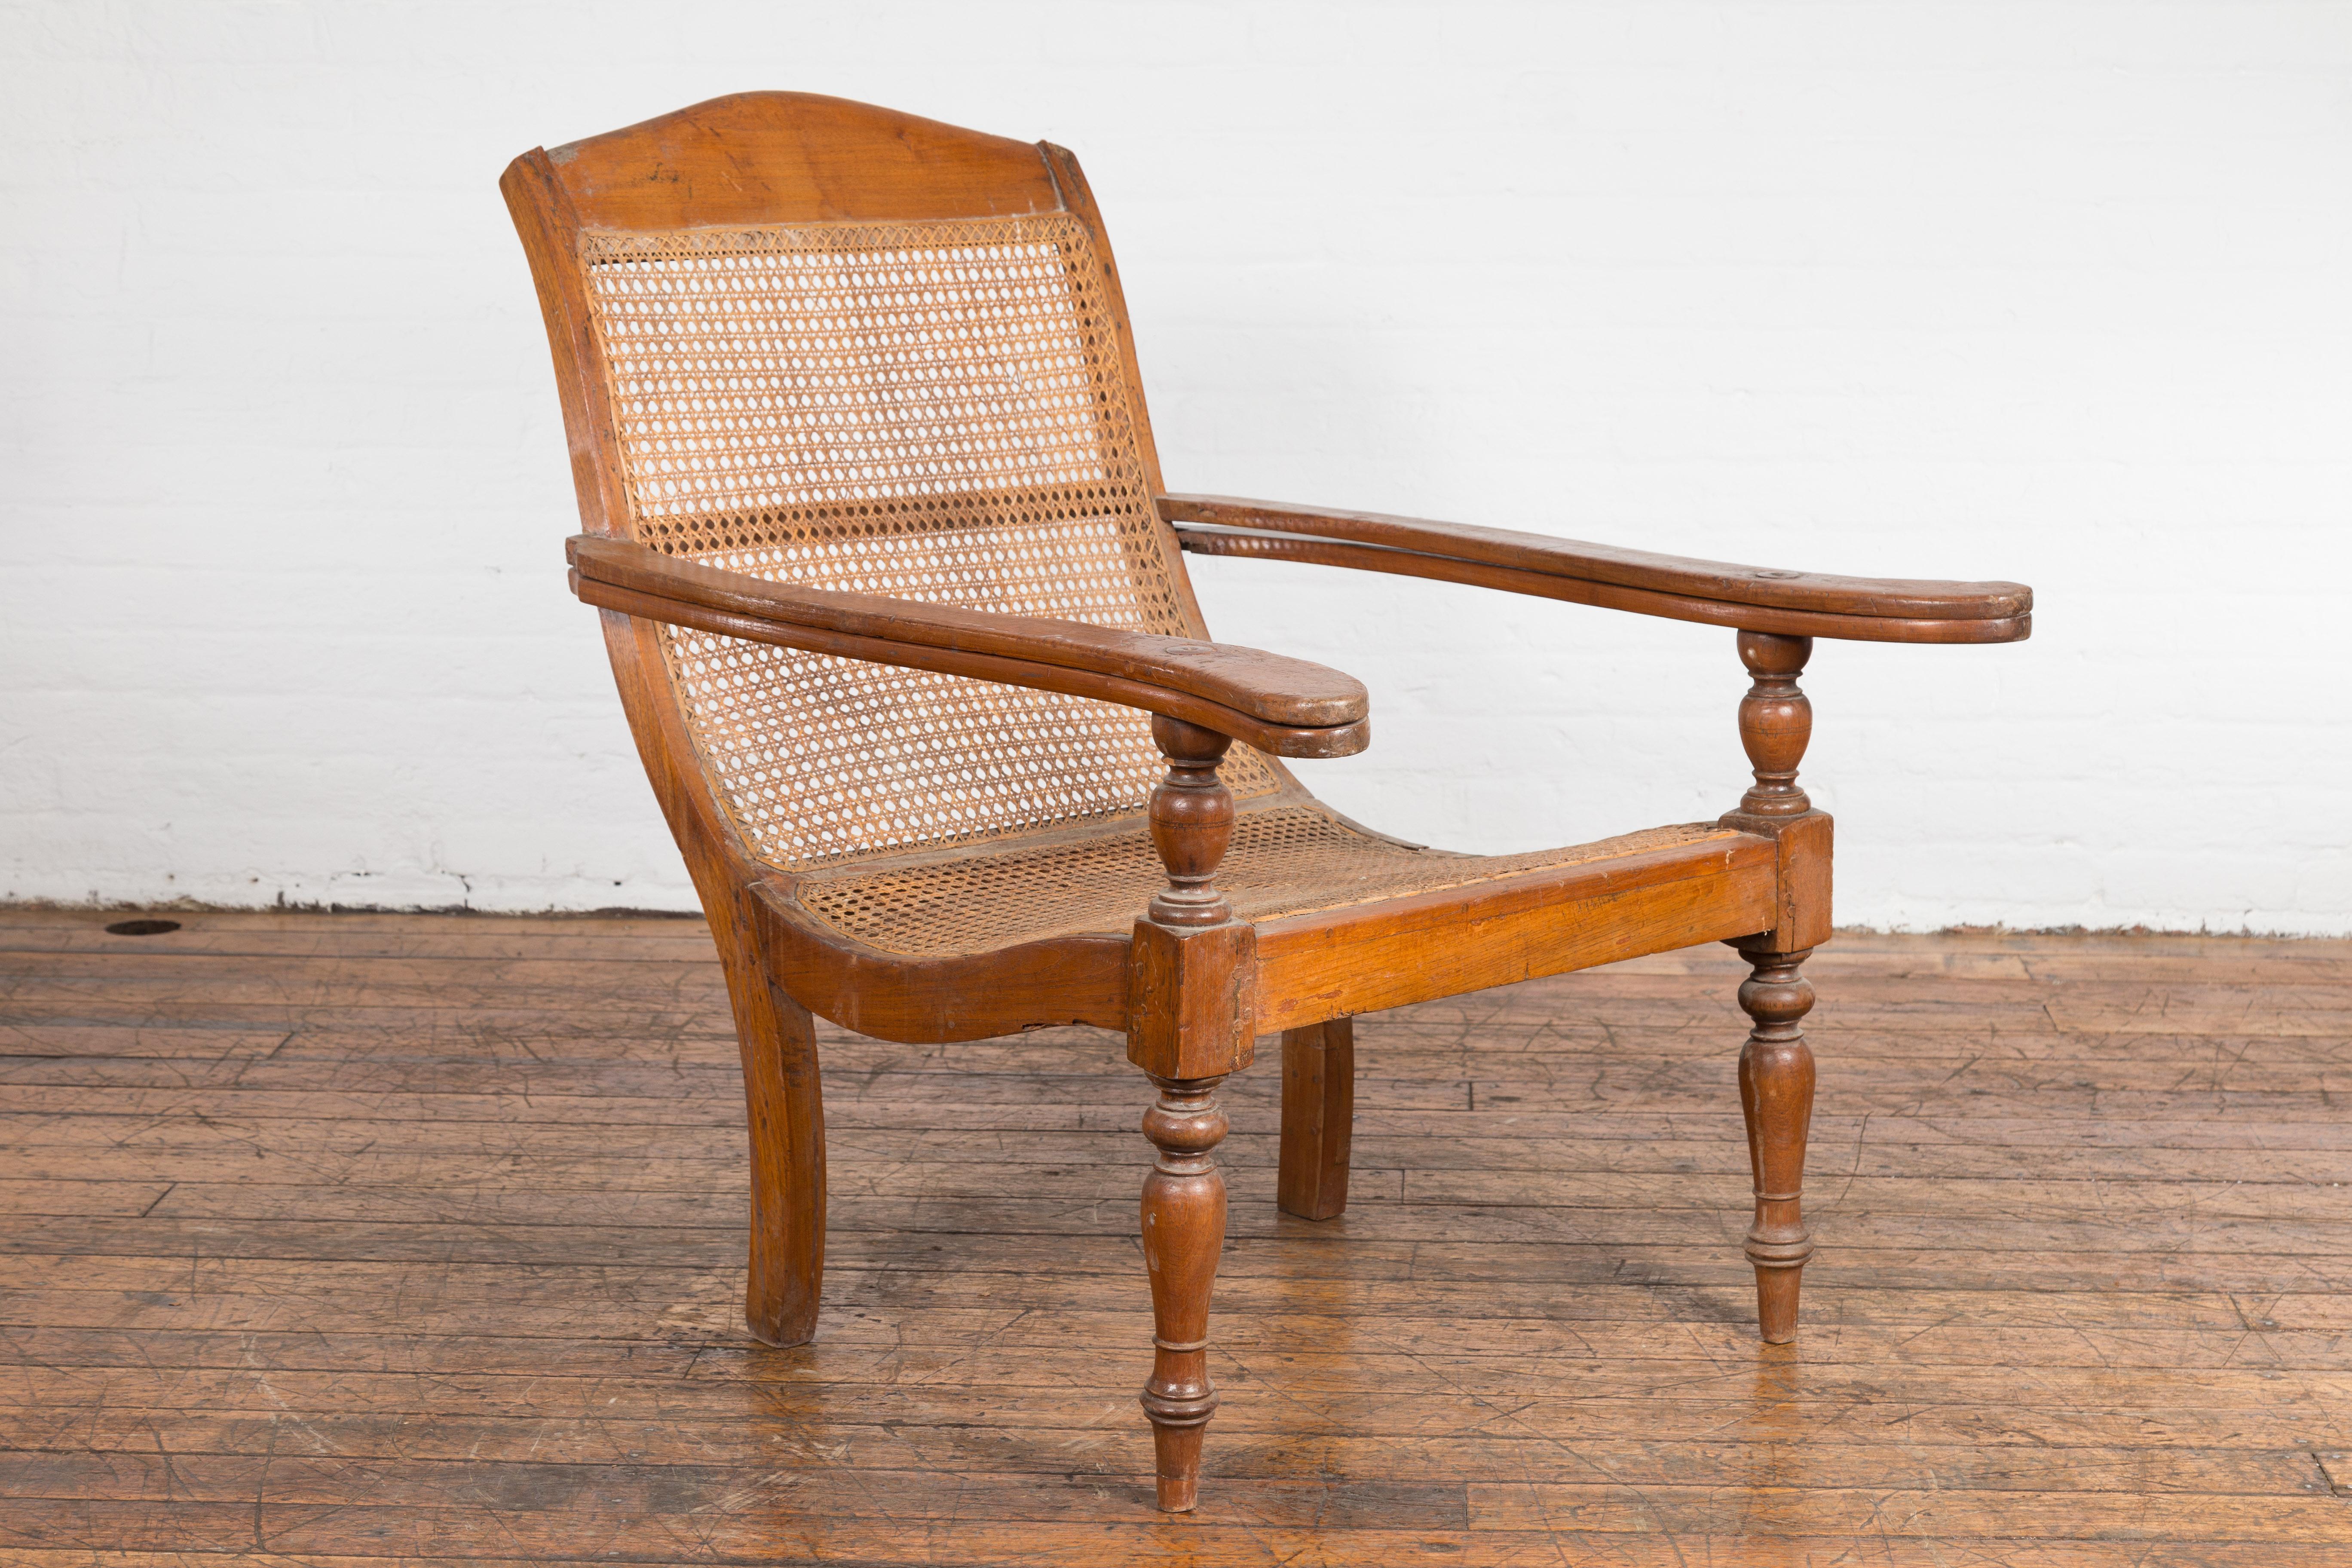 An antique Dutch Colonial Indonesian cane and wood plantation chair from the 20th century with extending arms and turned baluster legs. This antique Dutch Colonial Indonesian plantation chair from the 20th century is an exquisite blend of form and